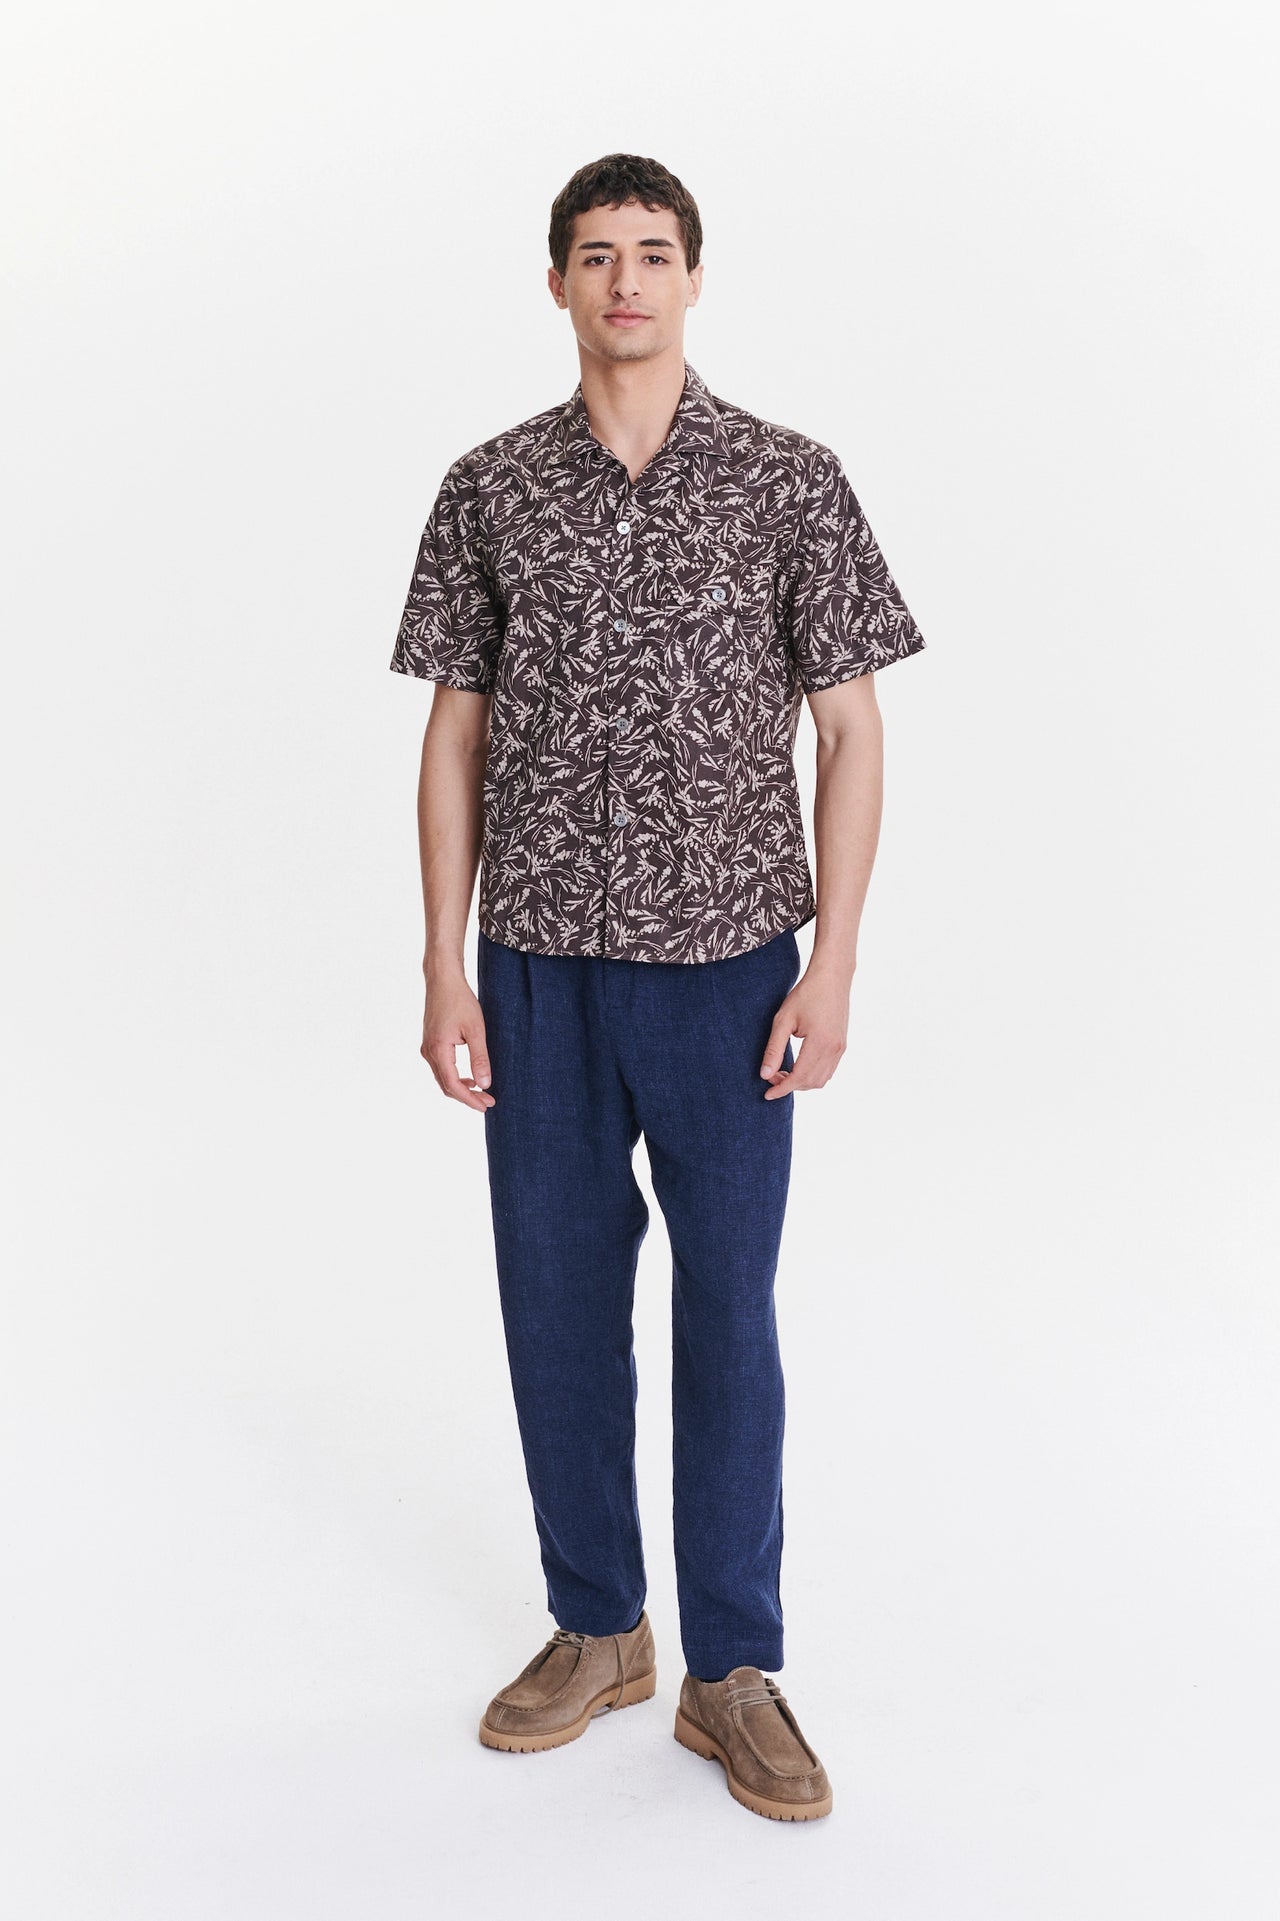 Short Sleeve Camp Collar Shirt in a Subtle Brown and Off White Floral Printed Italian Cotton